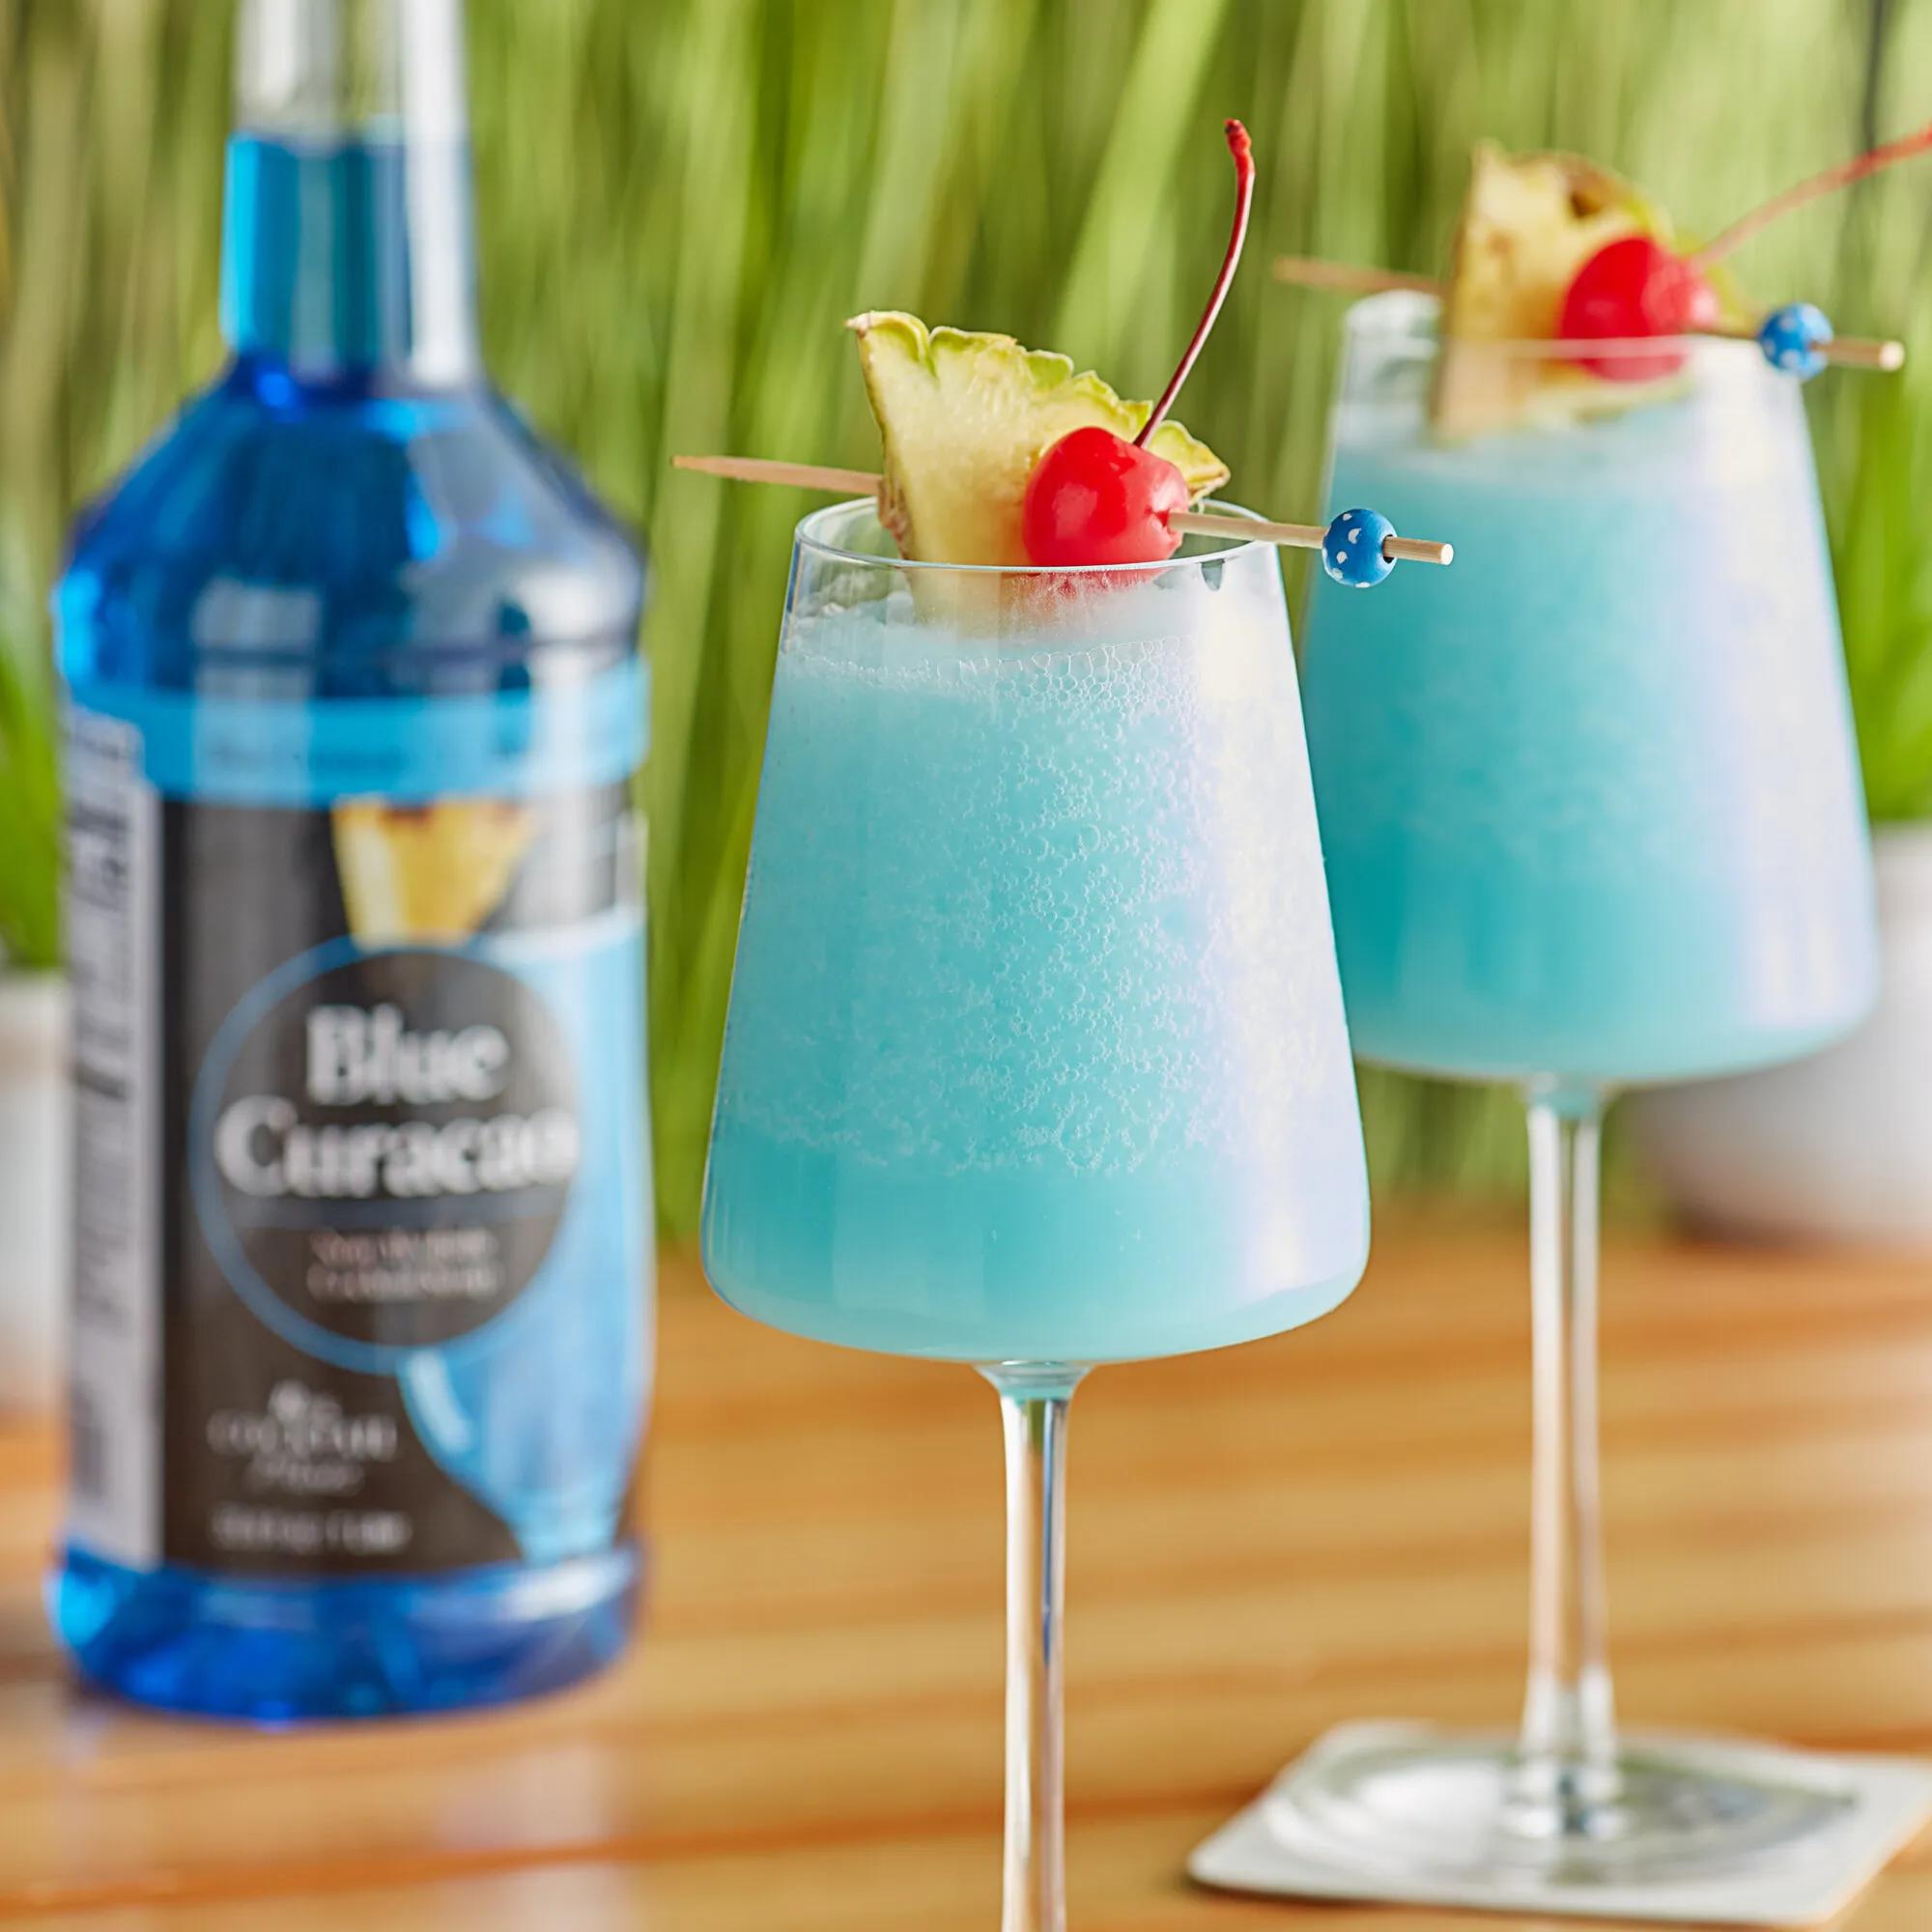 Regal Cocktail 1 Liter Blue Curacao Syrup